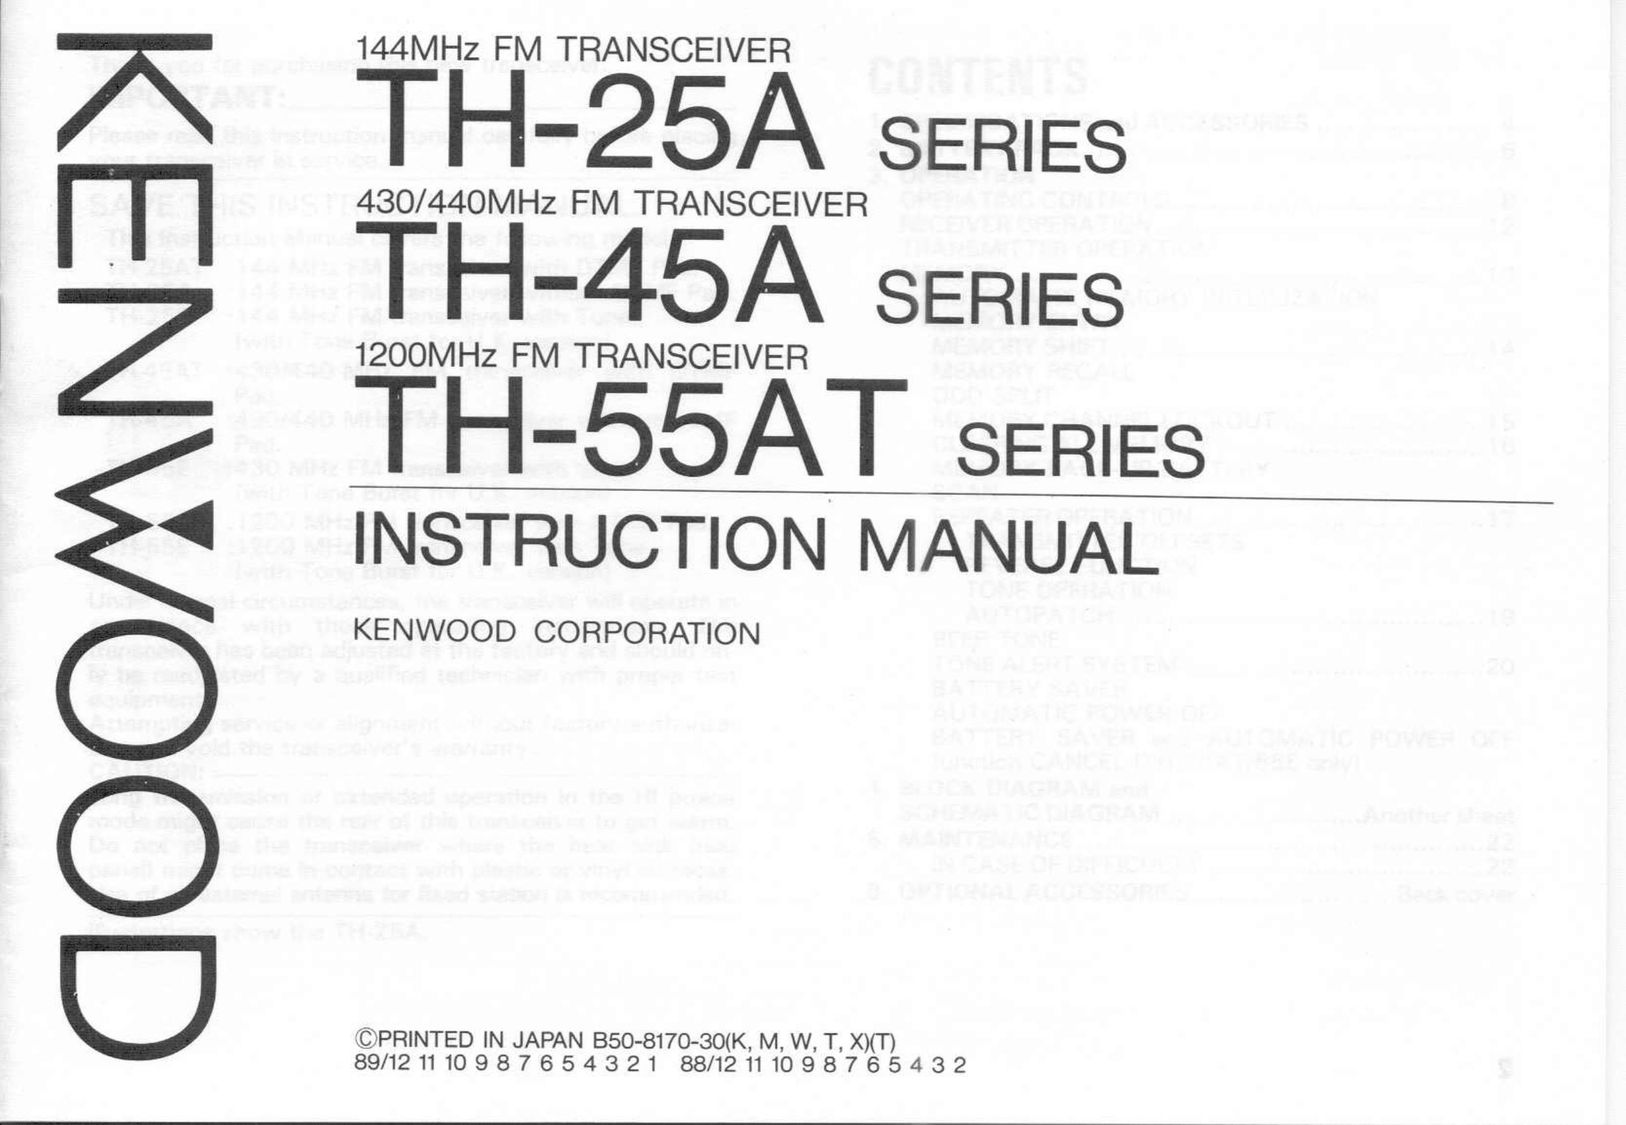 Kenwood TH-25A Home Security System User Manual